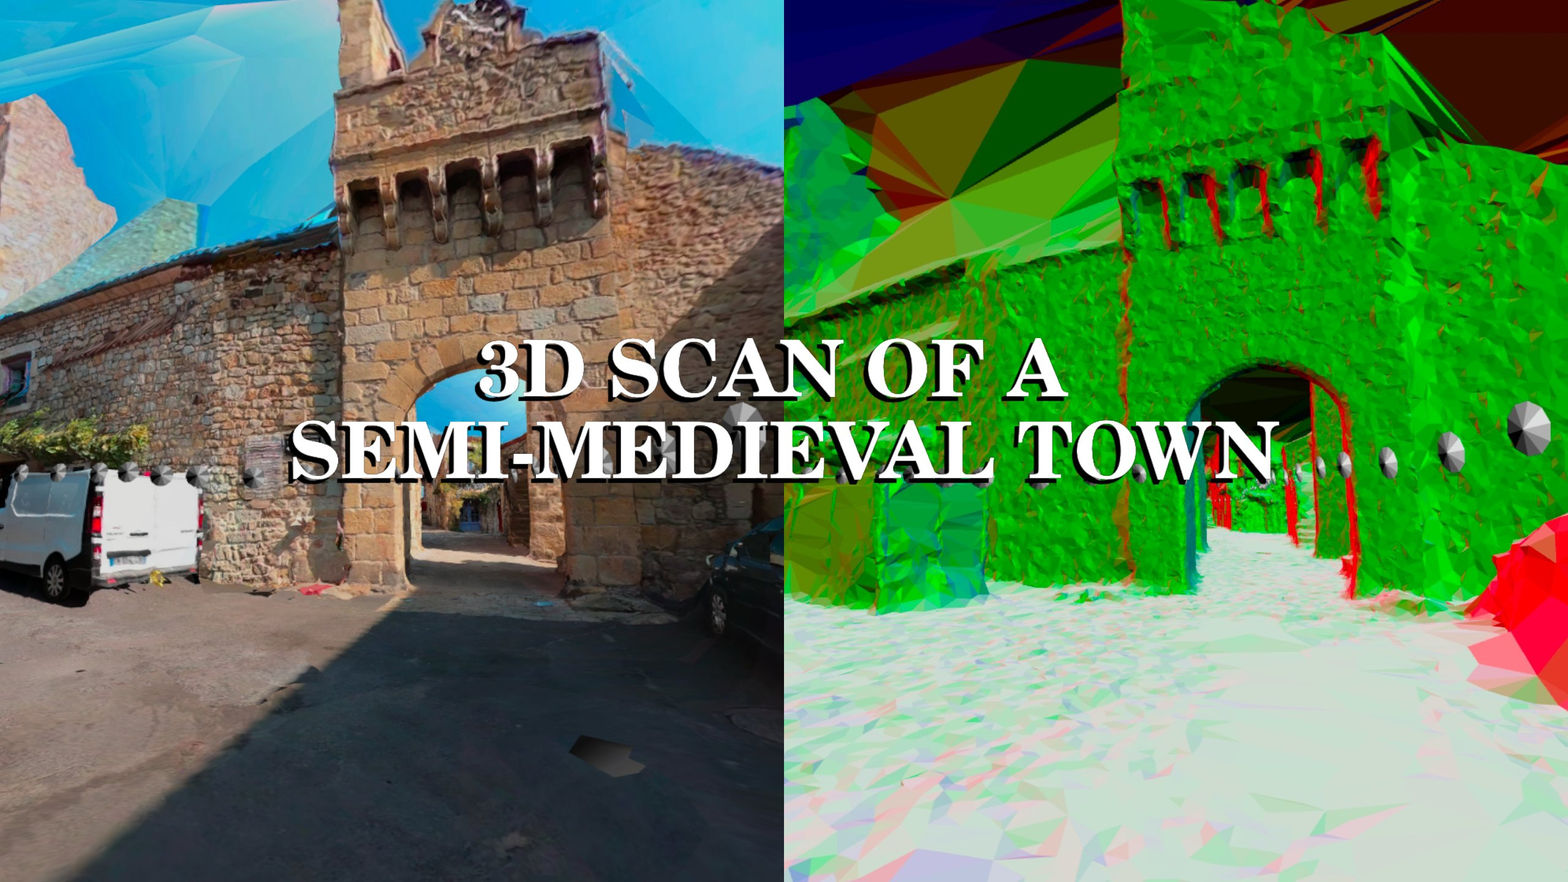 3D scan of a semi-medieval town